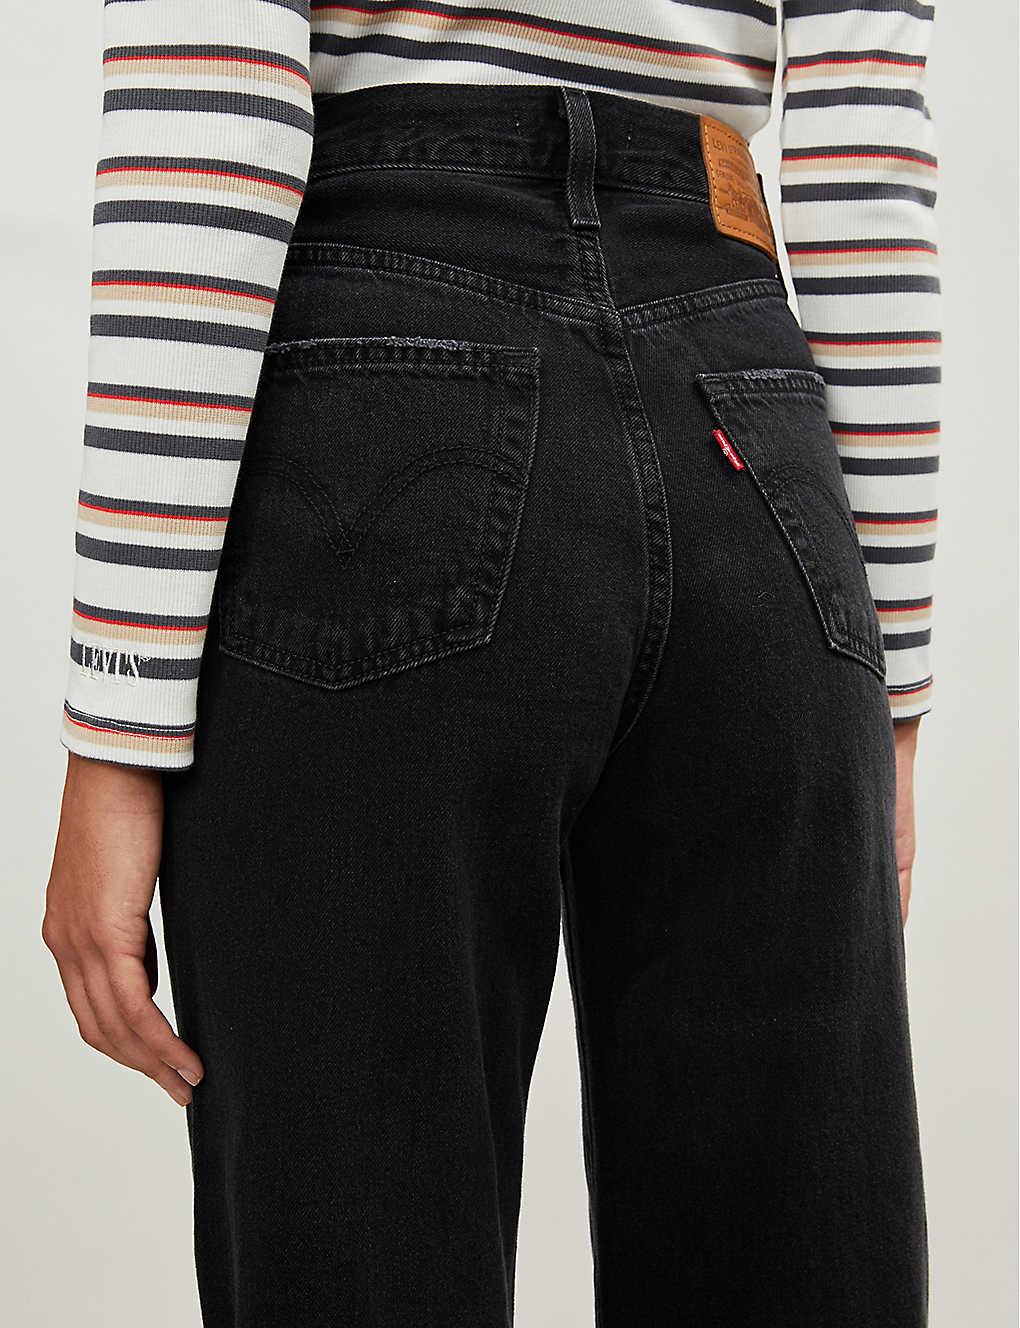 Levi's Denim Ribcage Straight High-rise Jeans in Black - Lyst